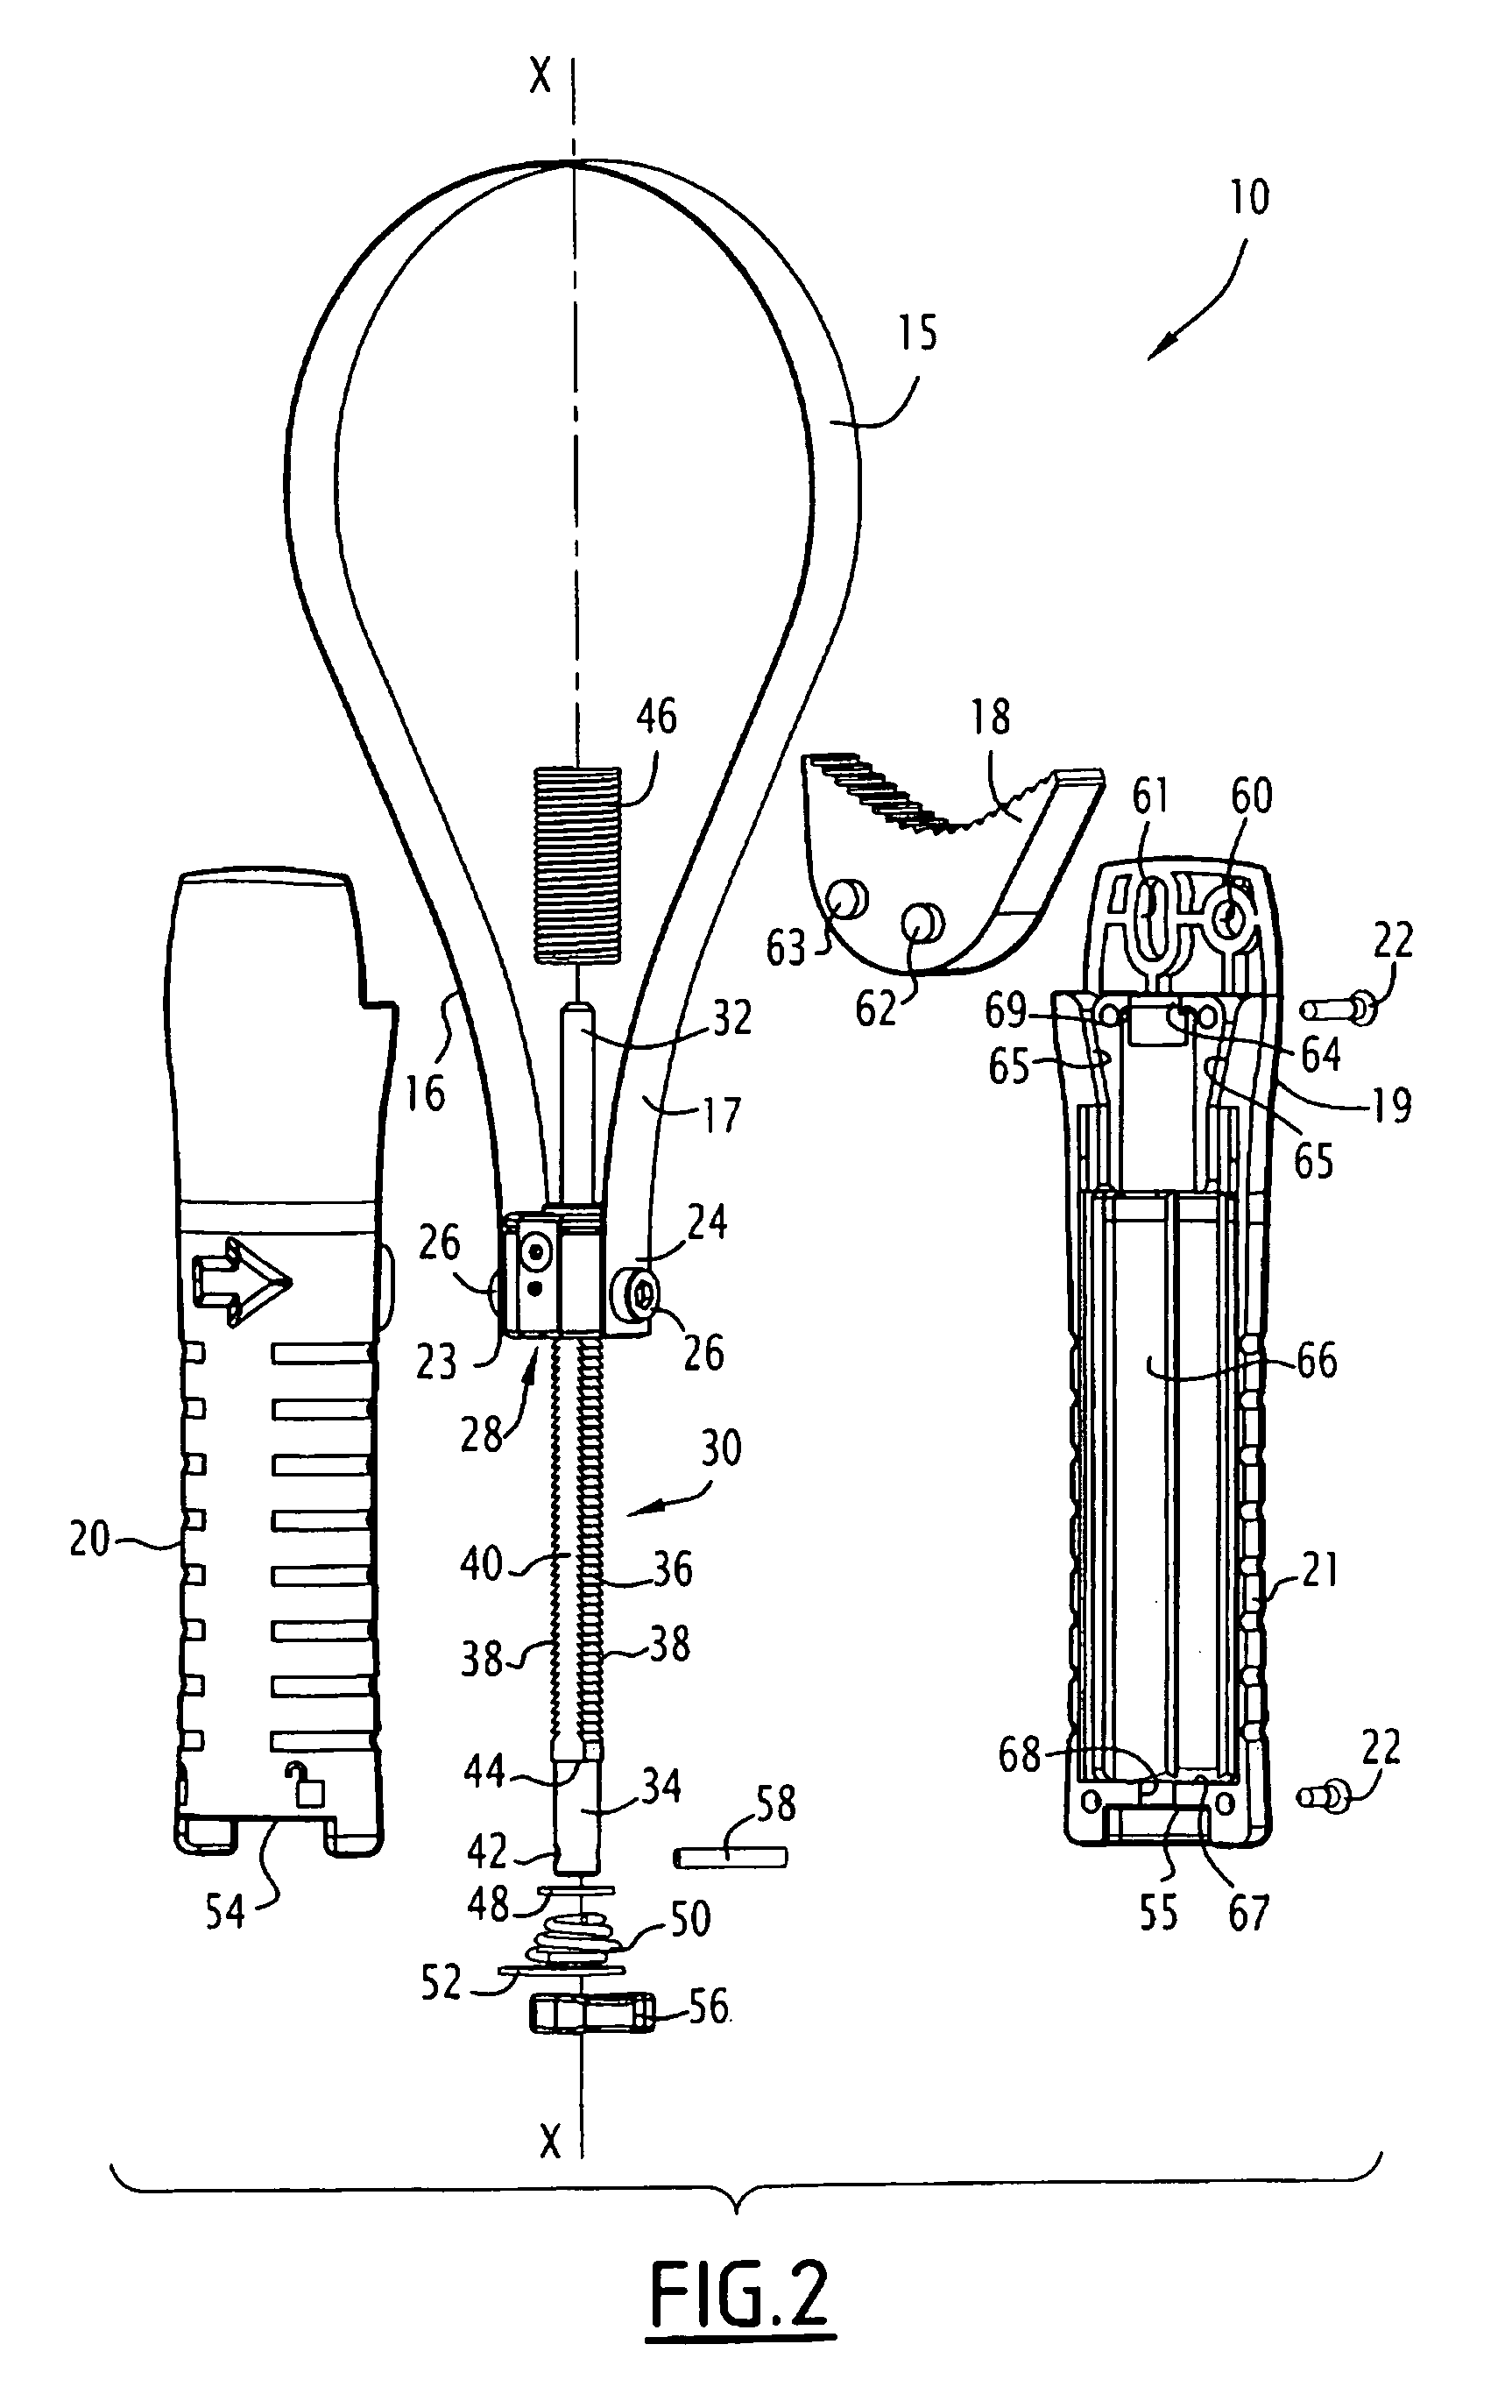 Strap pipe wrench for driving an object having a generally cylindrical shape